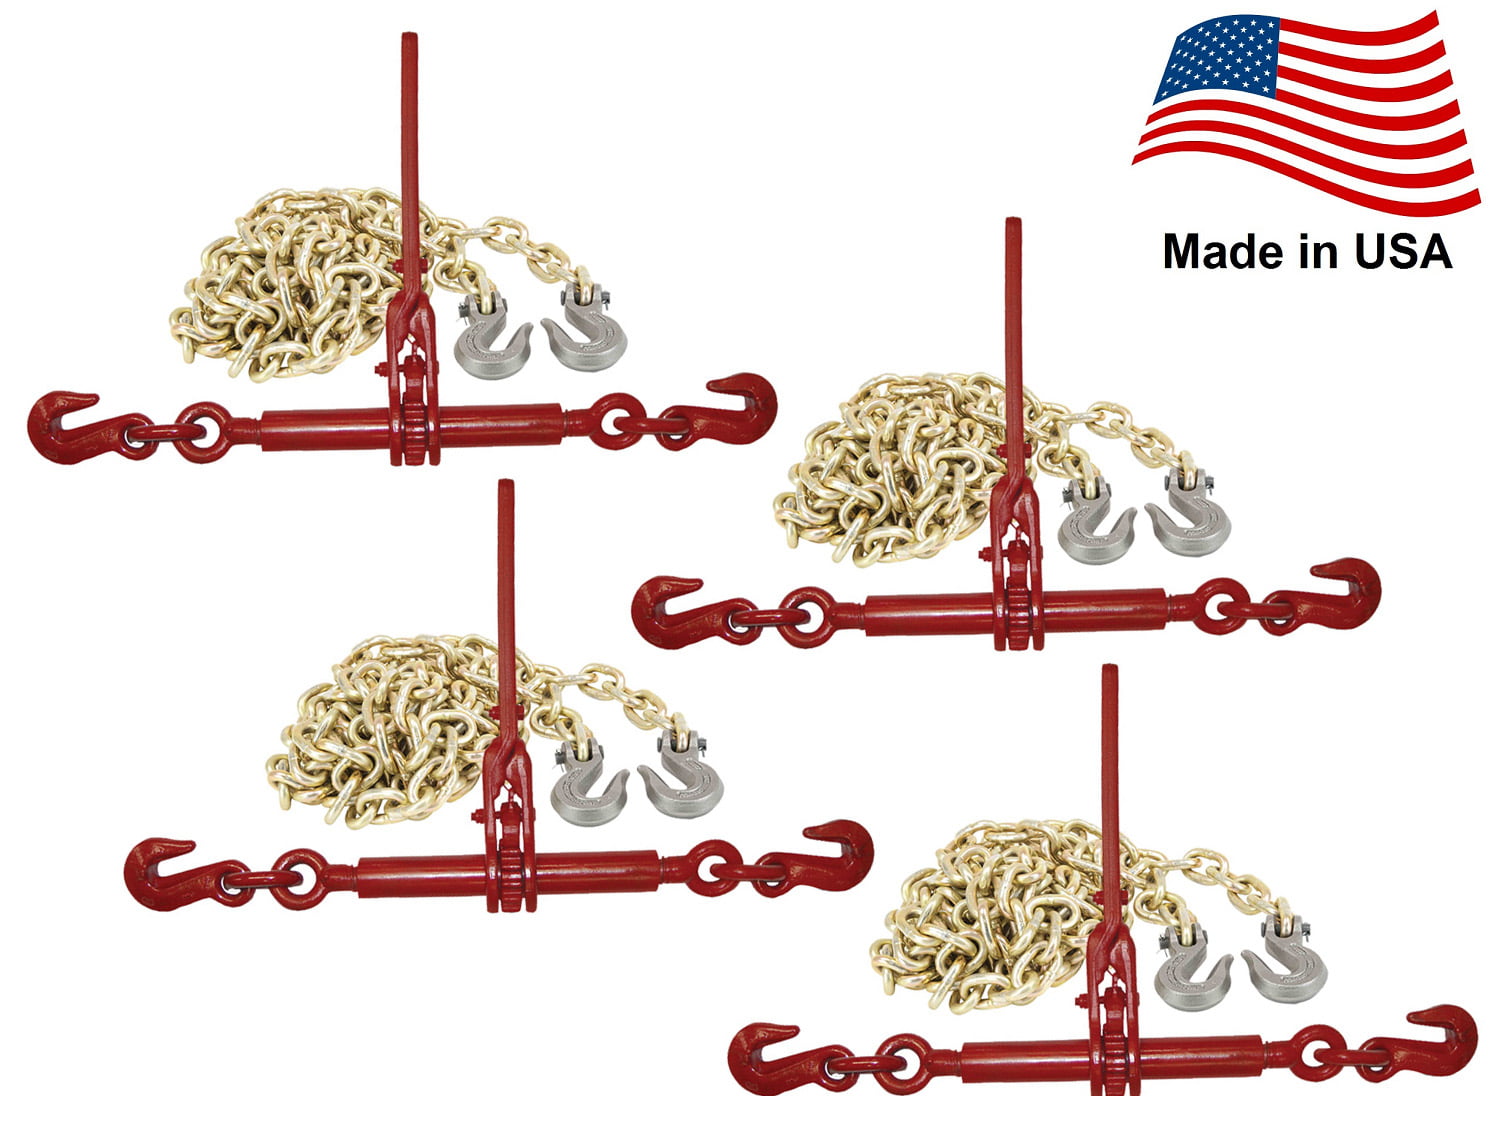 5/16 x 16 Grade 70 Transport Chain Made in USA Flatbed Trailer 2 Pack Mytee Products 